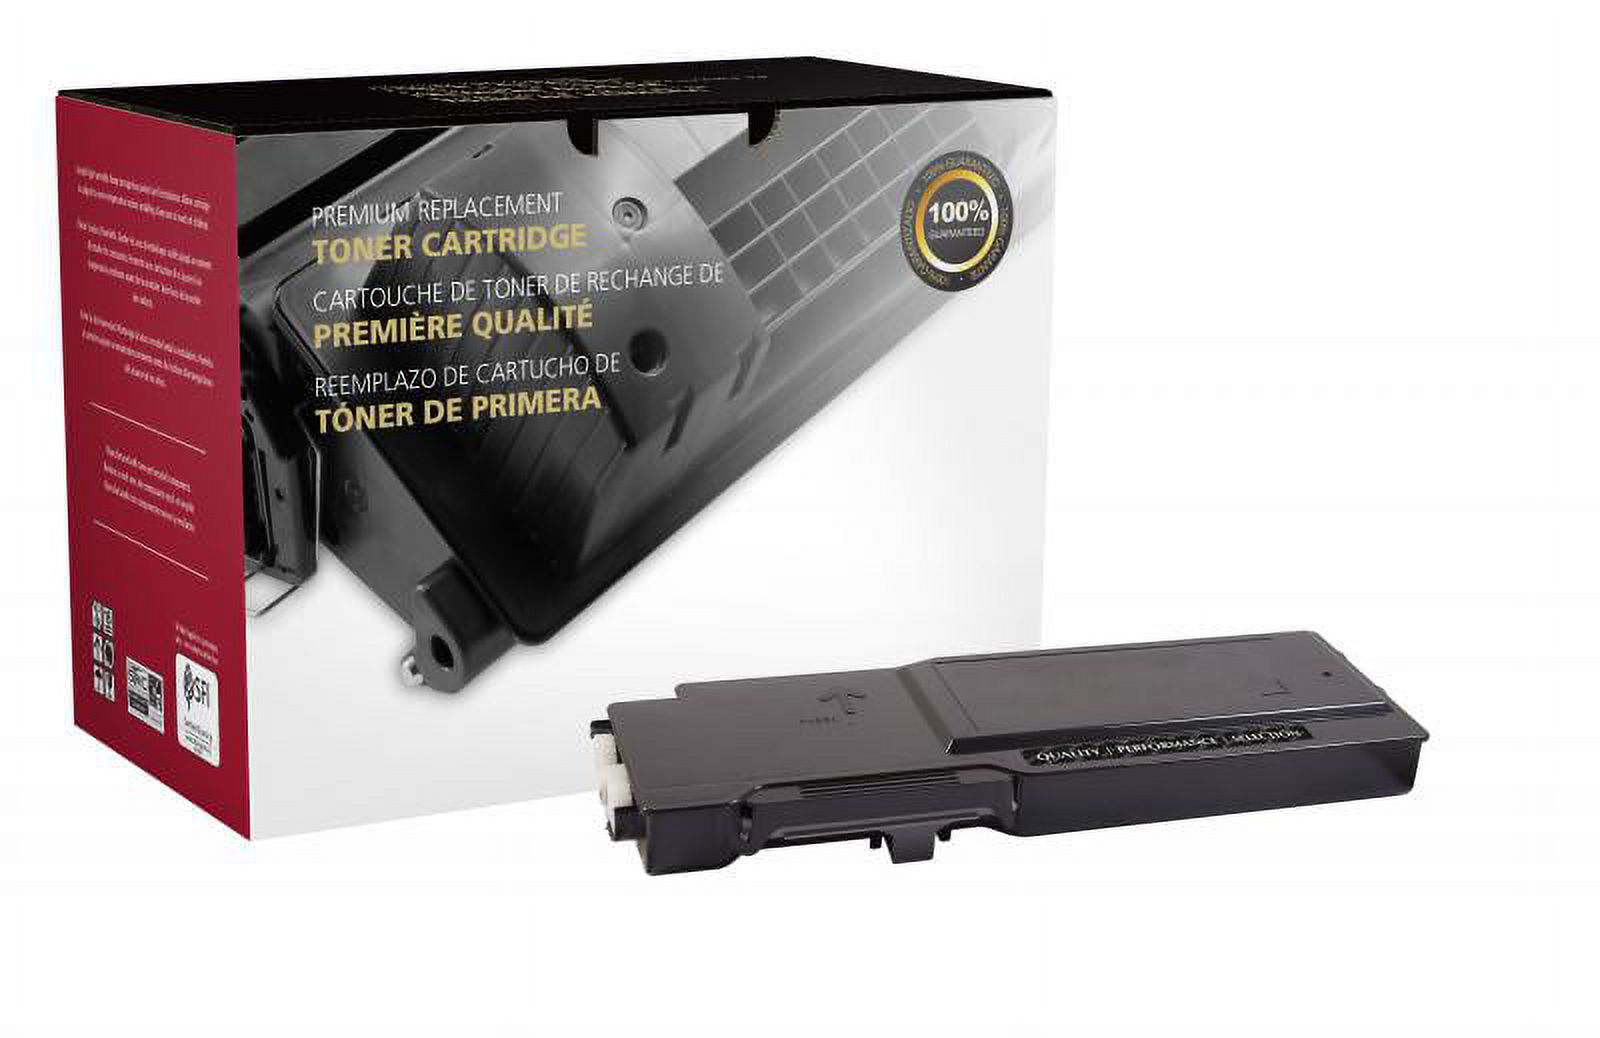 Clover Imaging Remanufactured High Yield Black Toner Cartridge for Xerox 106R02228 - image 1 of 3